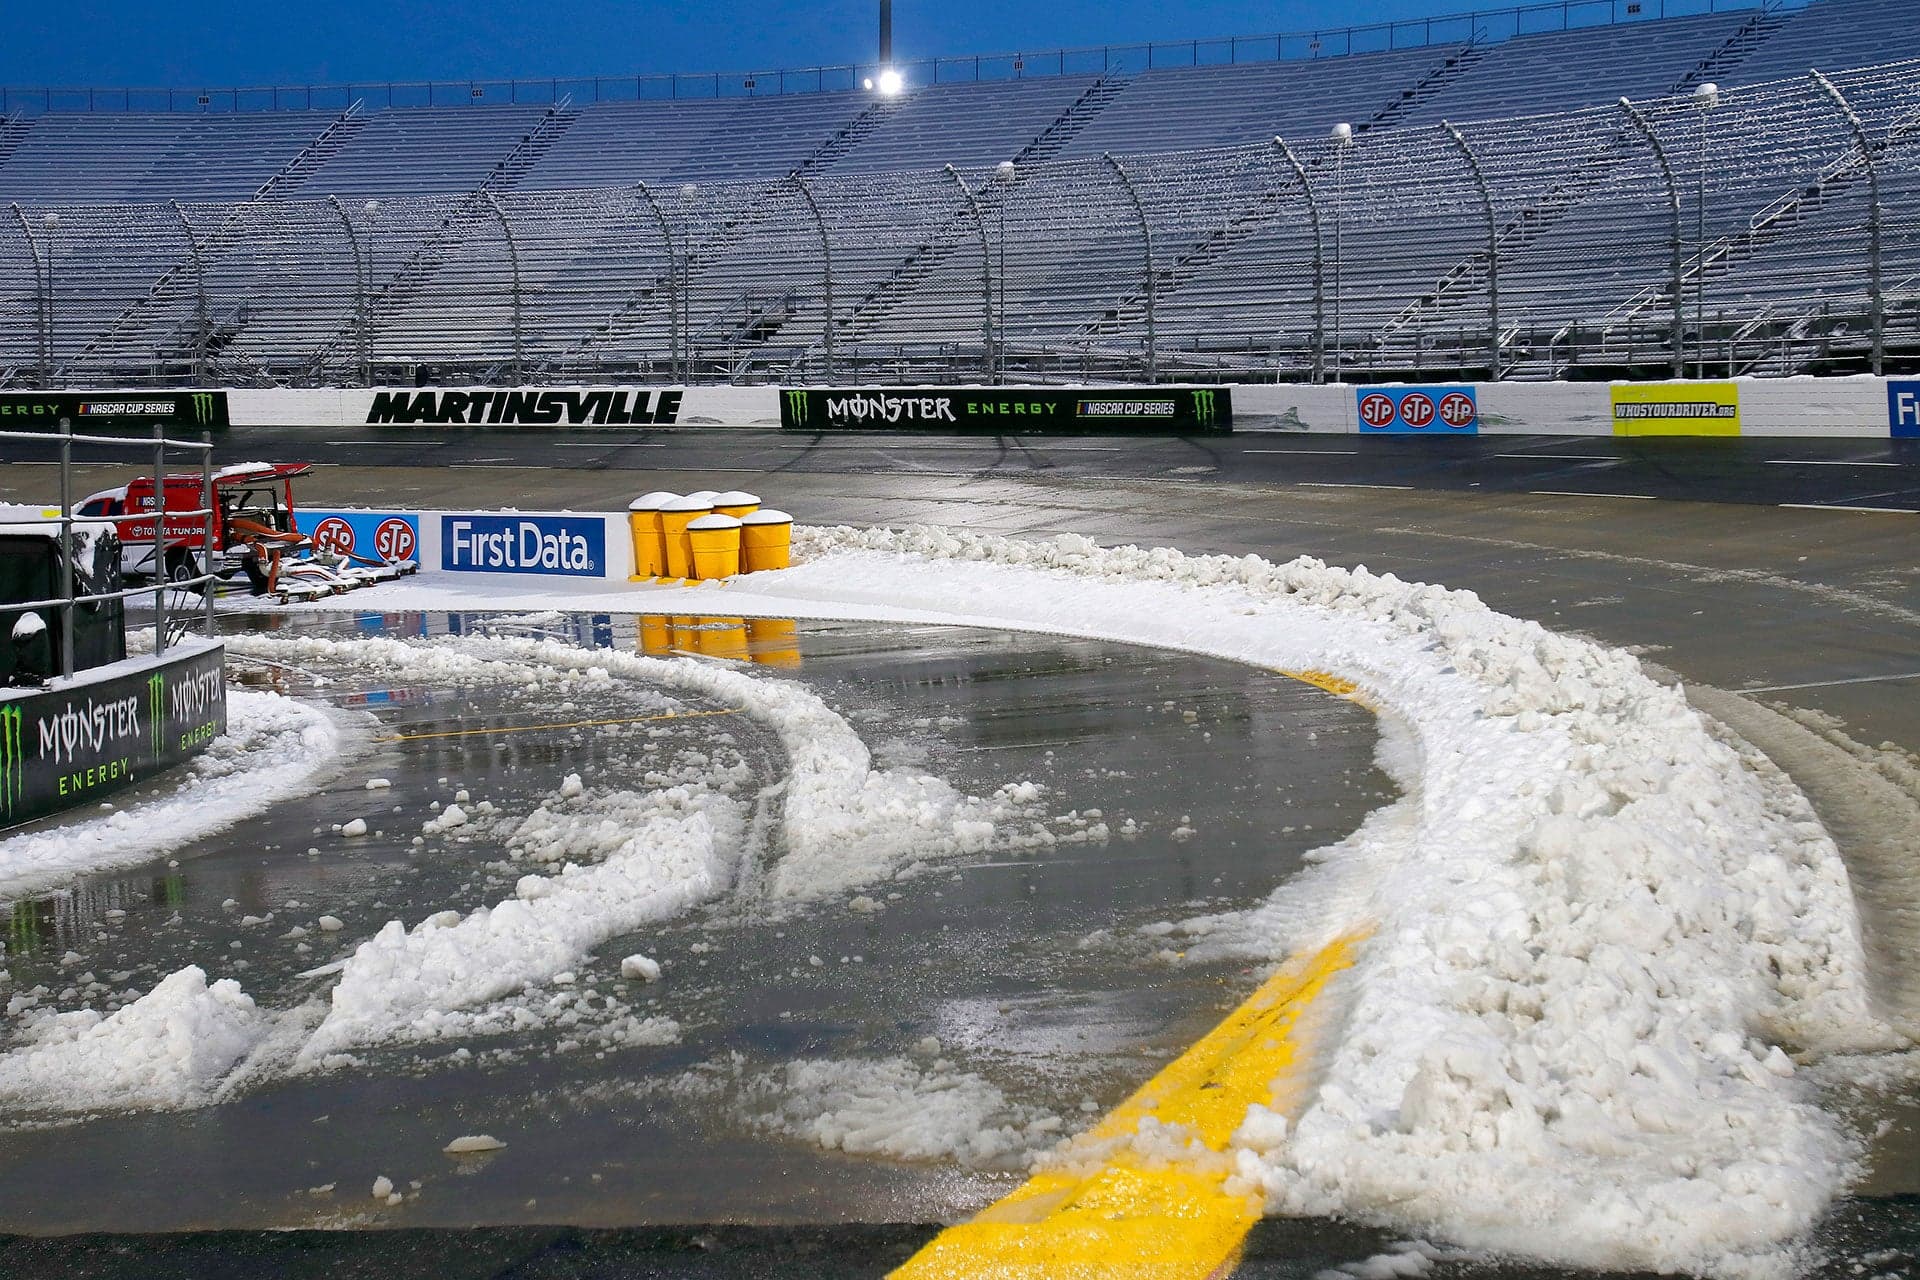 Preview: STP 500 NASCAR Cup Race at Martinsville Rescheduled Due to Weather